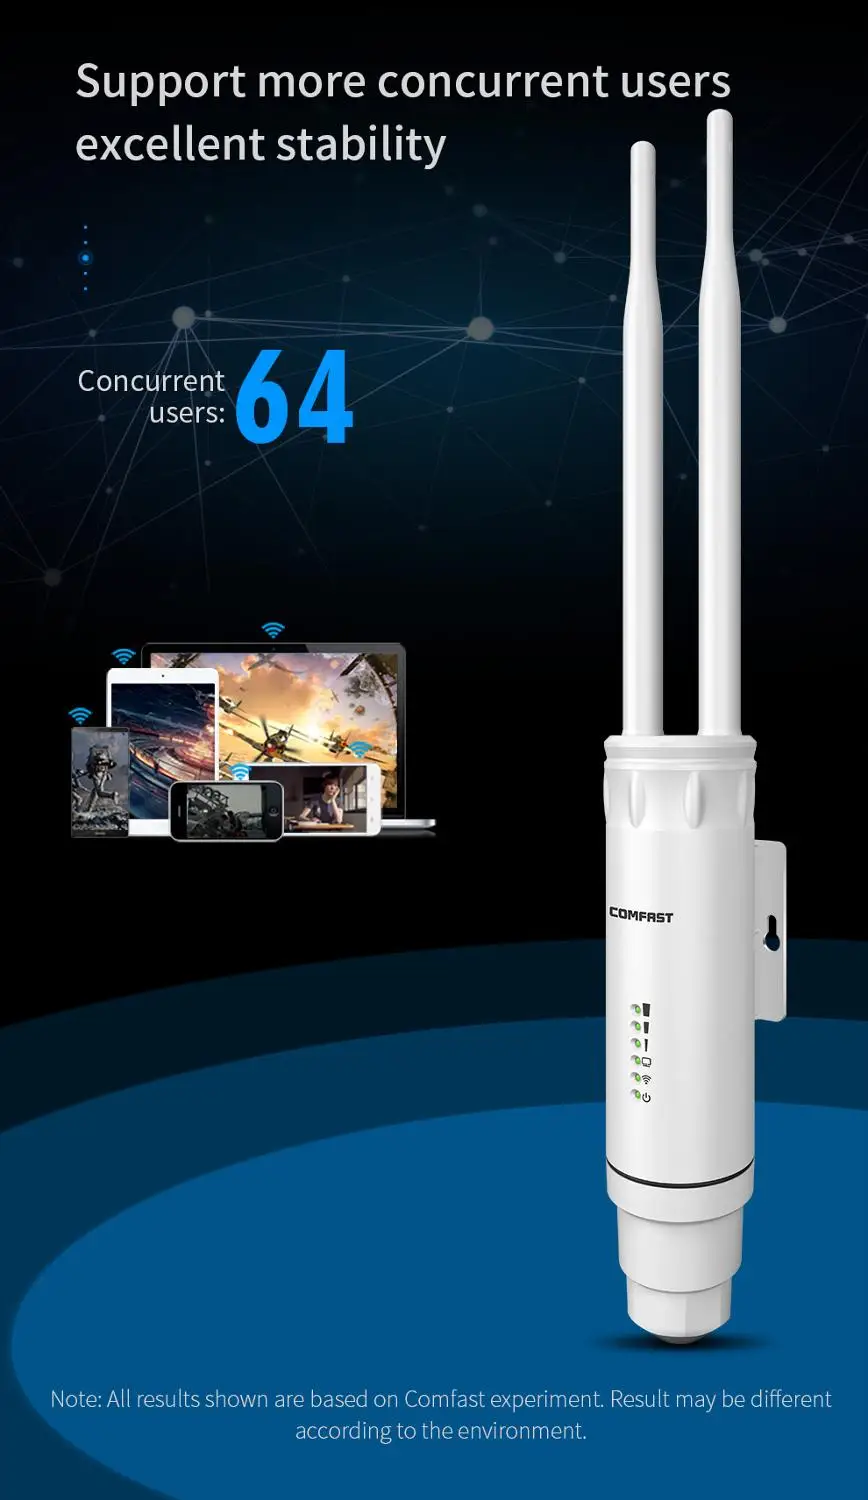 High Power AC1200 Poe Access Outdoor Wireless wifi Repeater AP/WIFI Router 1200Mbps Dual Dand 2.4G+5Ghz Long Range Extender PoE pixlink 5ghz 2 4g ac1200 wireless mini router ap wifi repeater long range extender booster dual band english firmware lv ac05